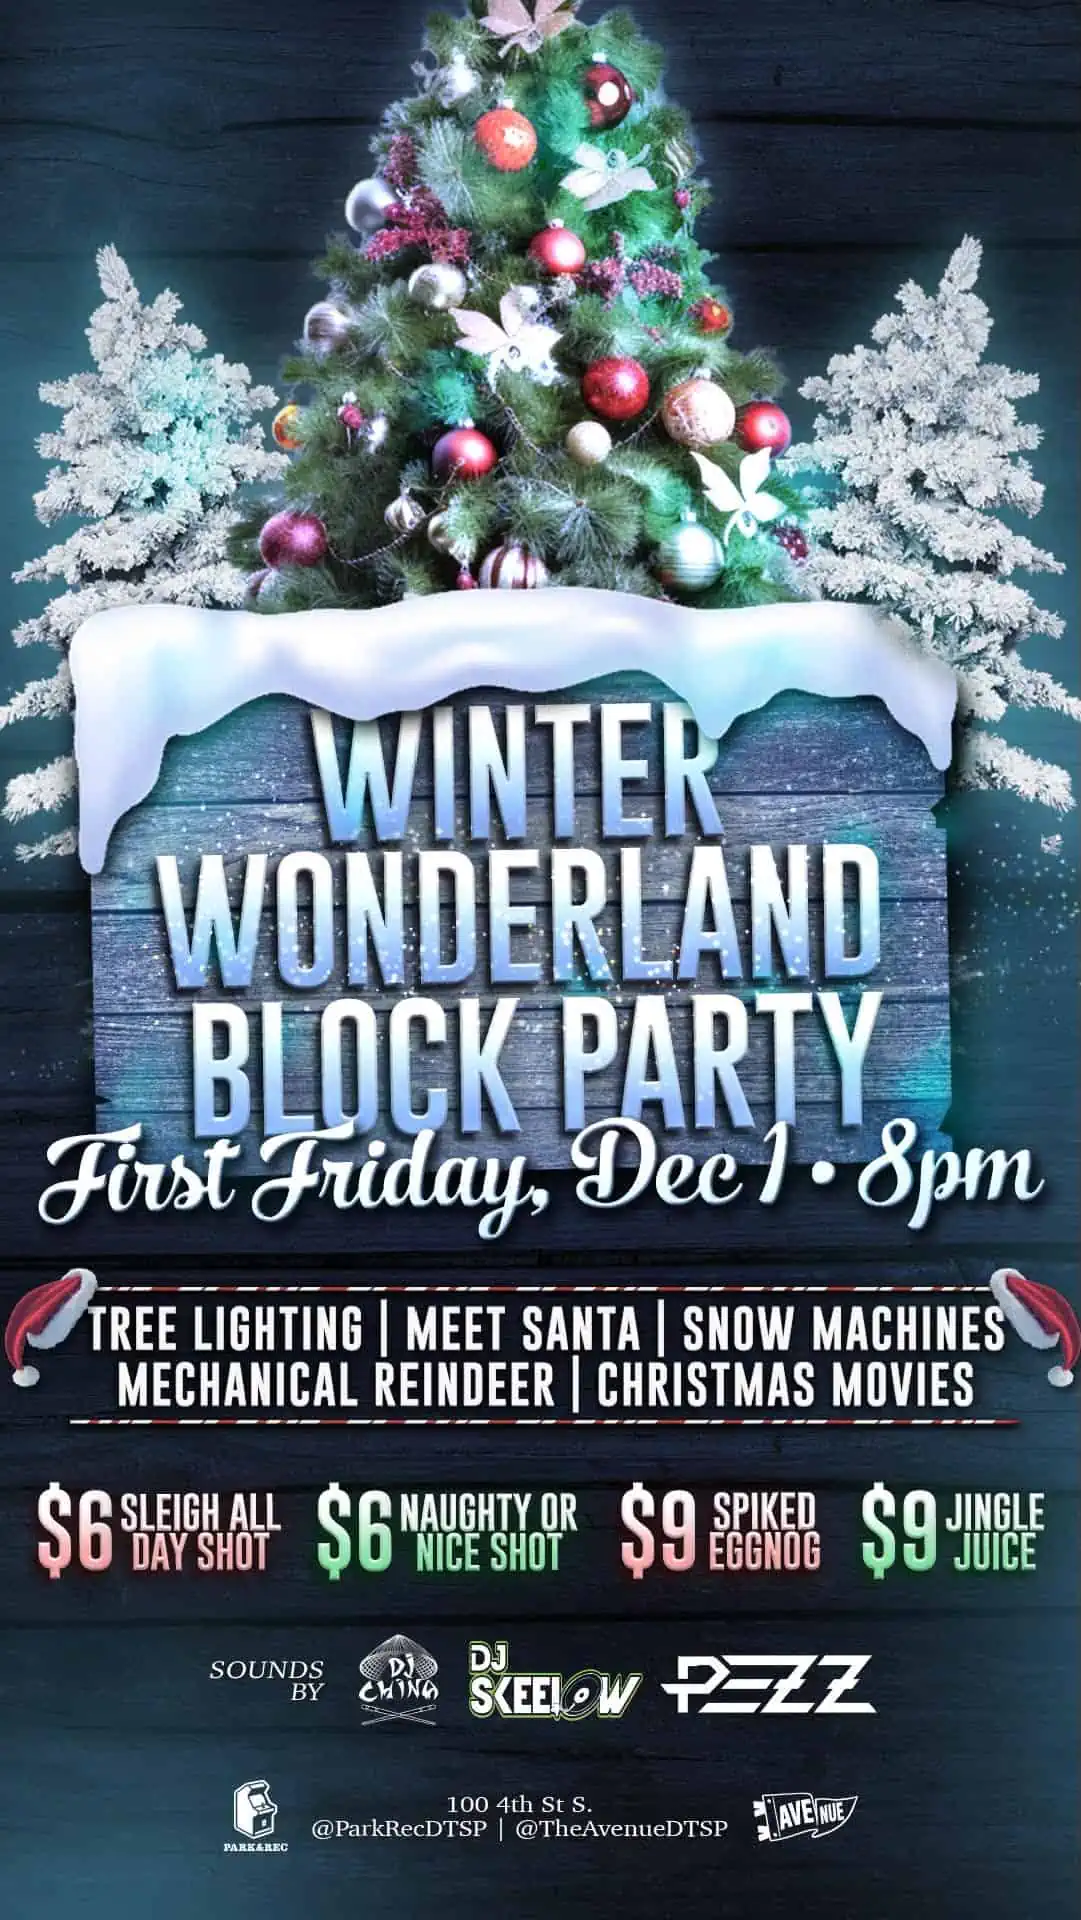 Winter Wonderland Block Party - First Friday Dec 1 at 8pm